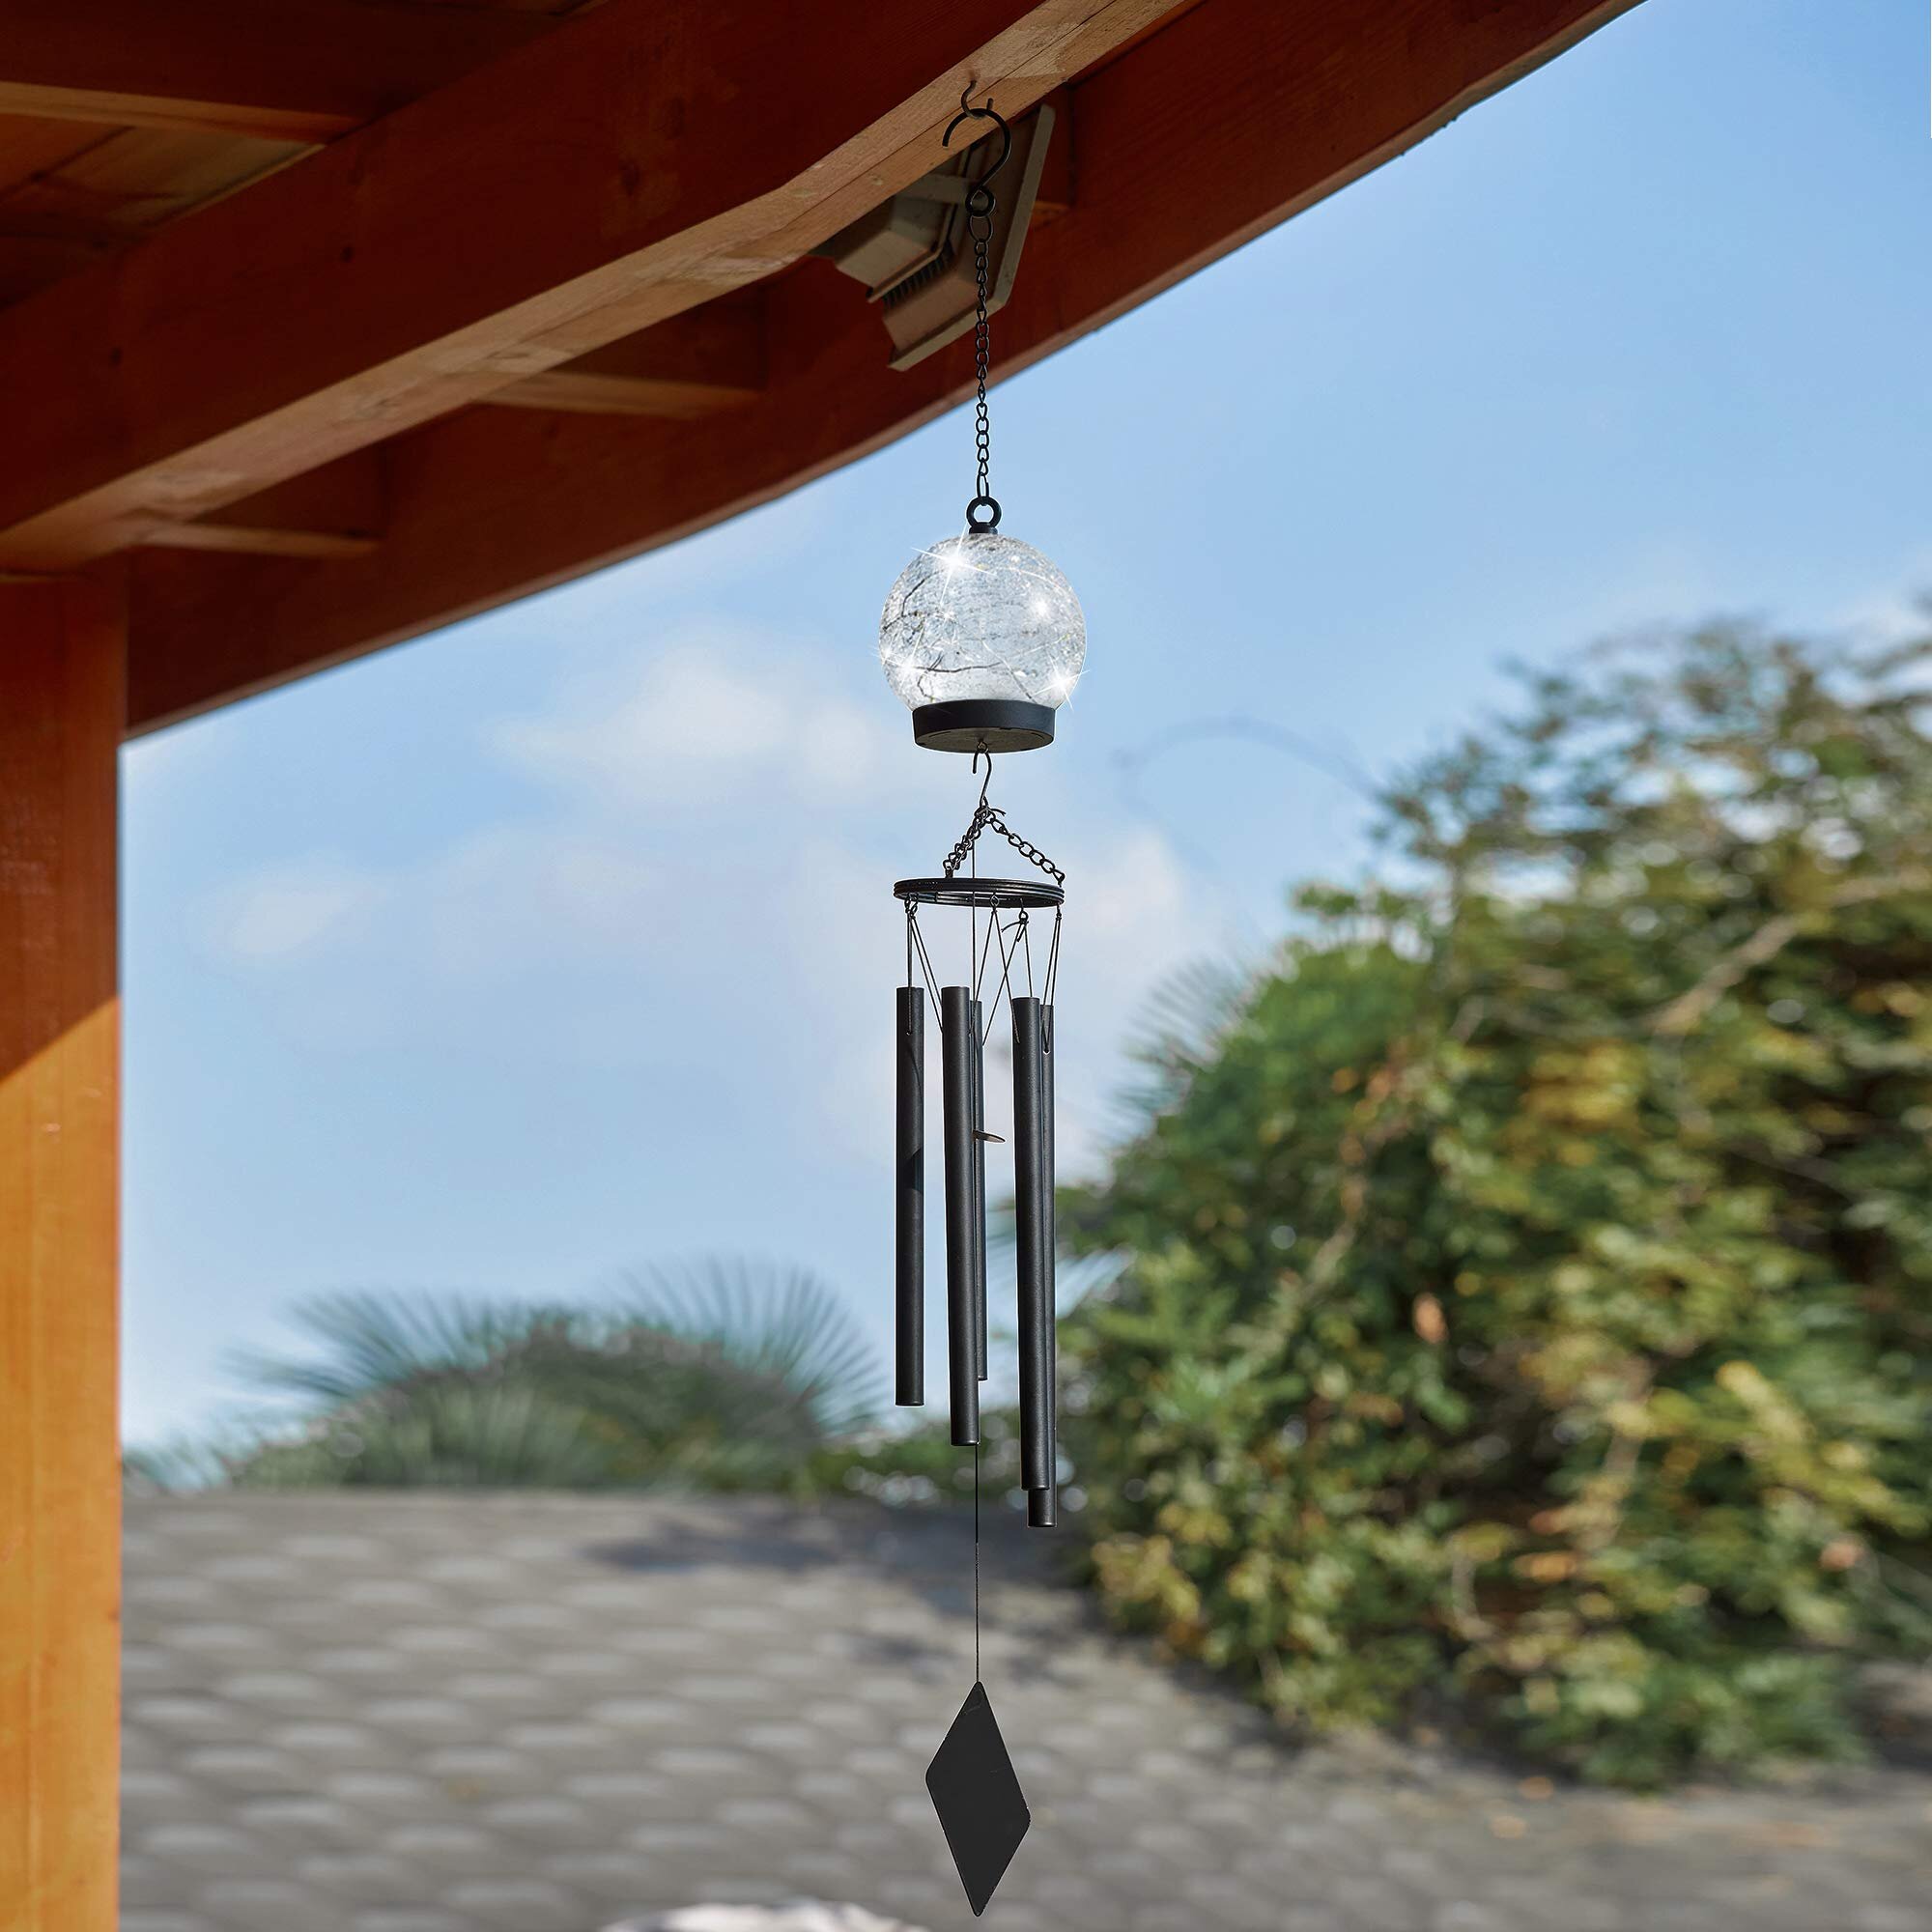 Landscape Yard Wind Chimes Outdoor Solar Lights 42 Inch Large Sympathy Chime 15 LED Twinkle Warm White Crackled Glass Sphere Ball Hanging Lantern Birthday Gifts for Decorative in Garden Patio 